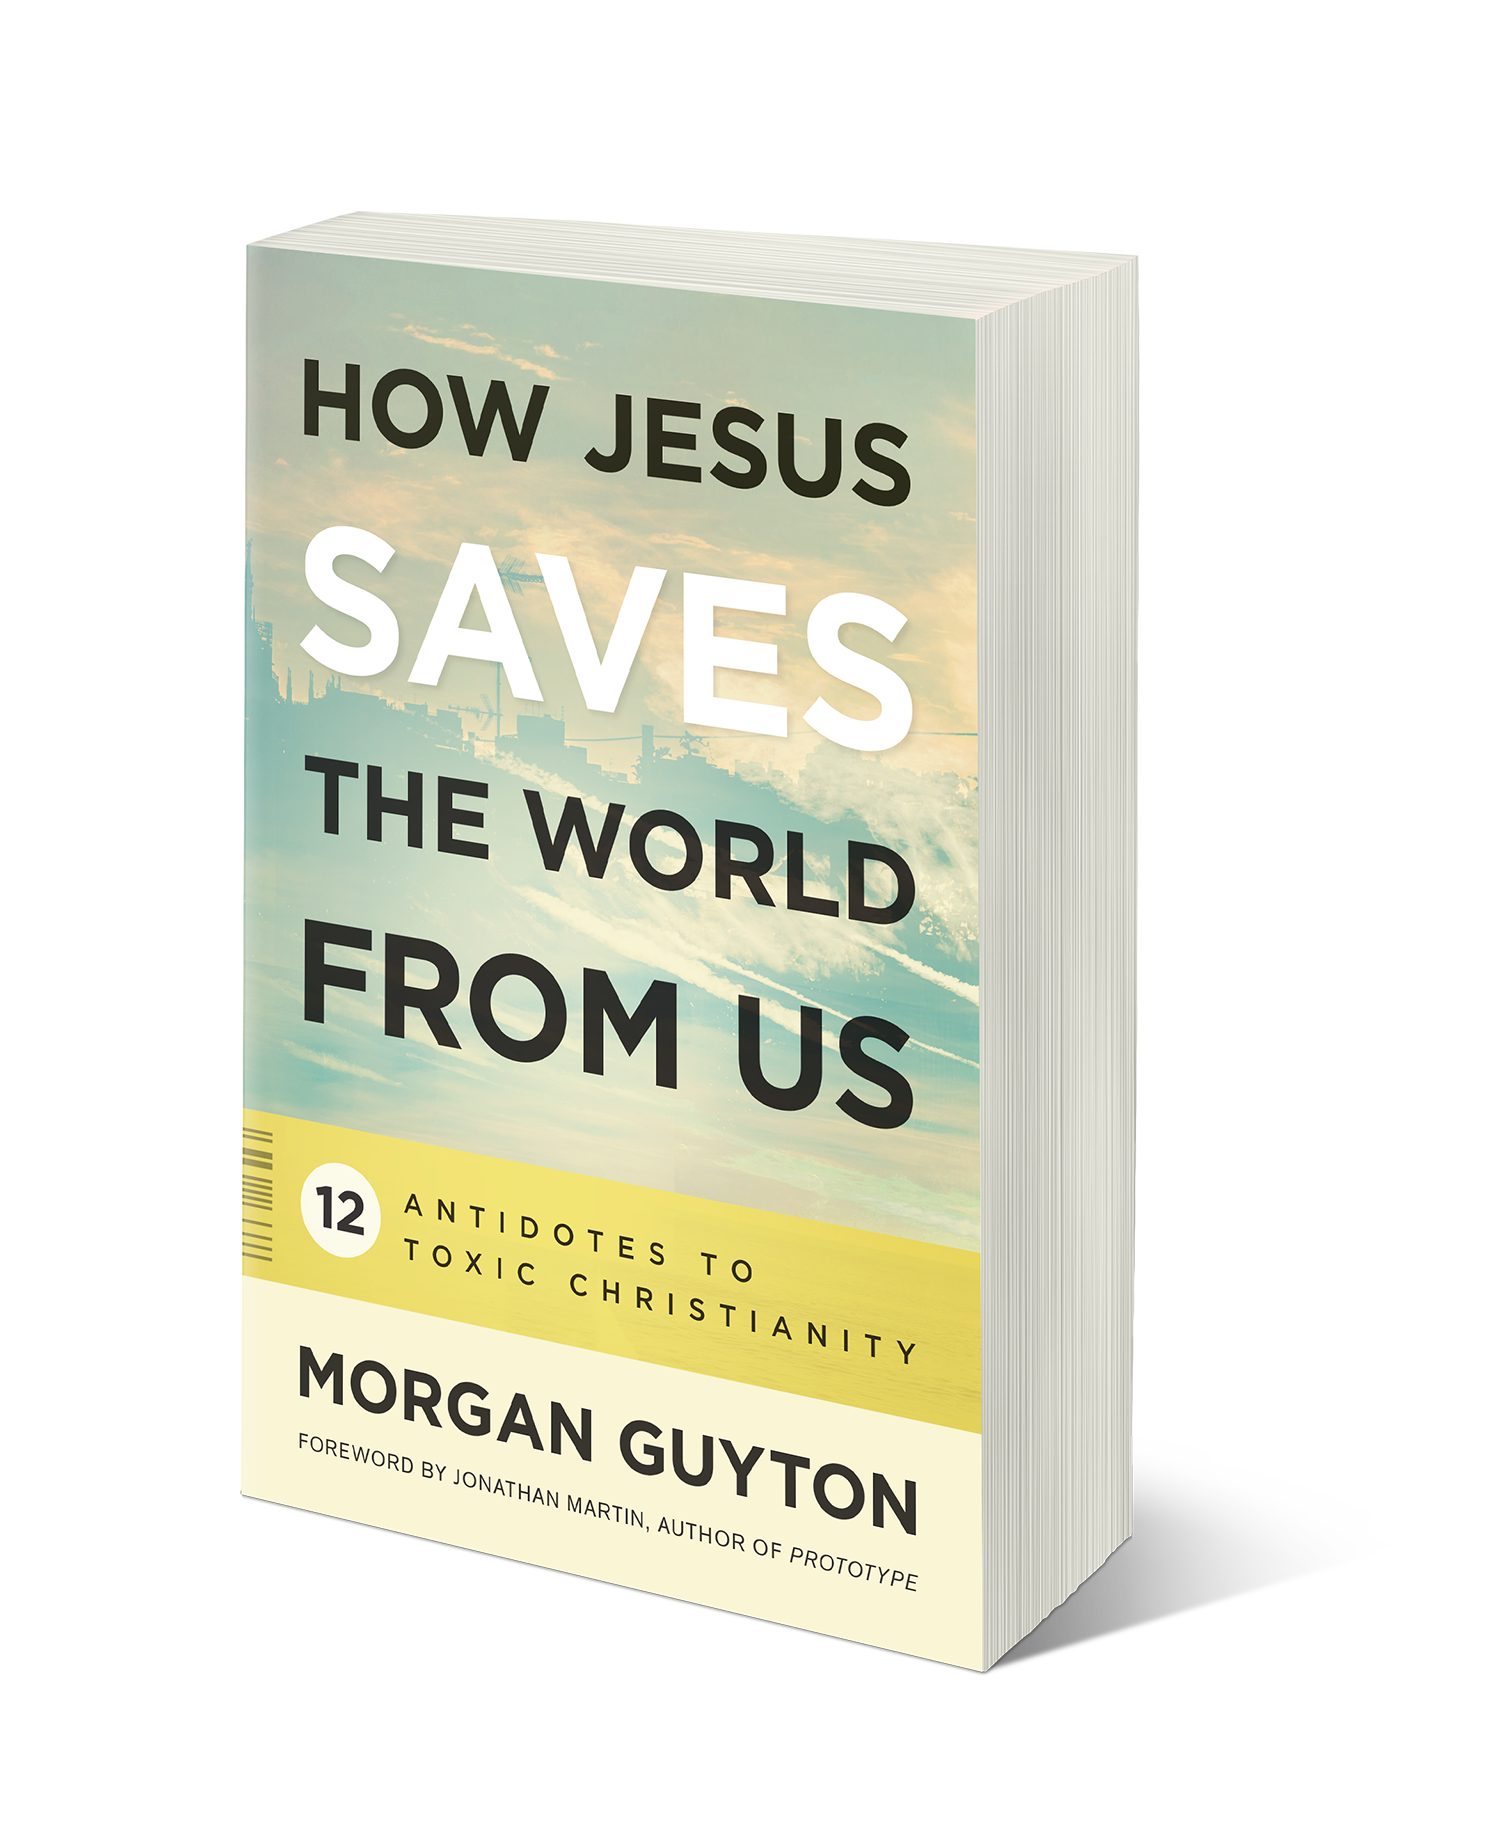 How Jesus Saves the World from Us